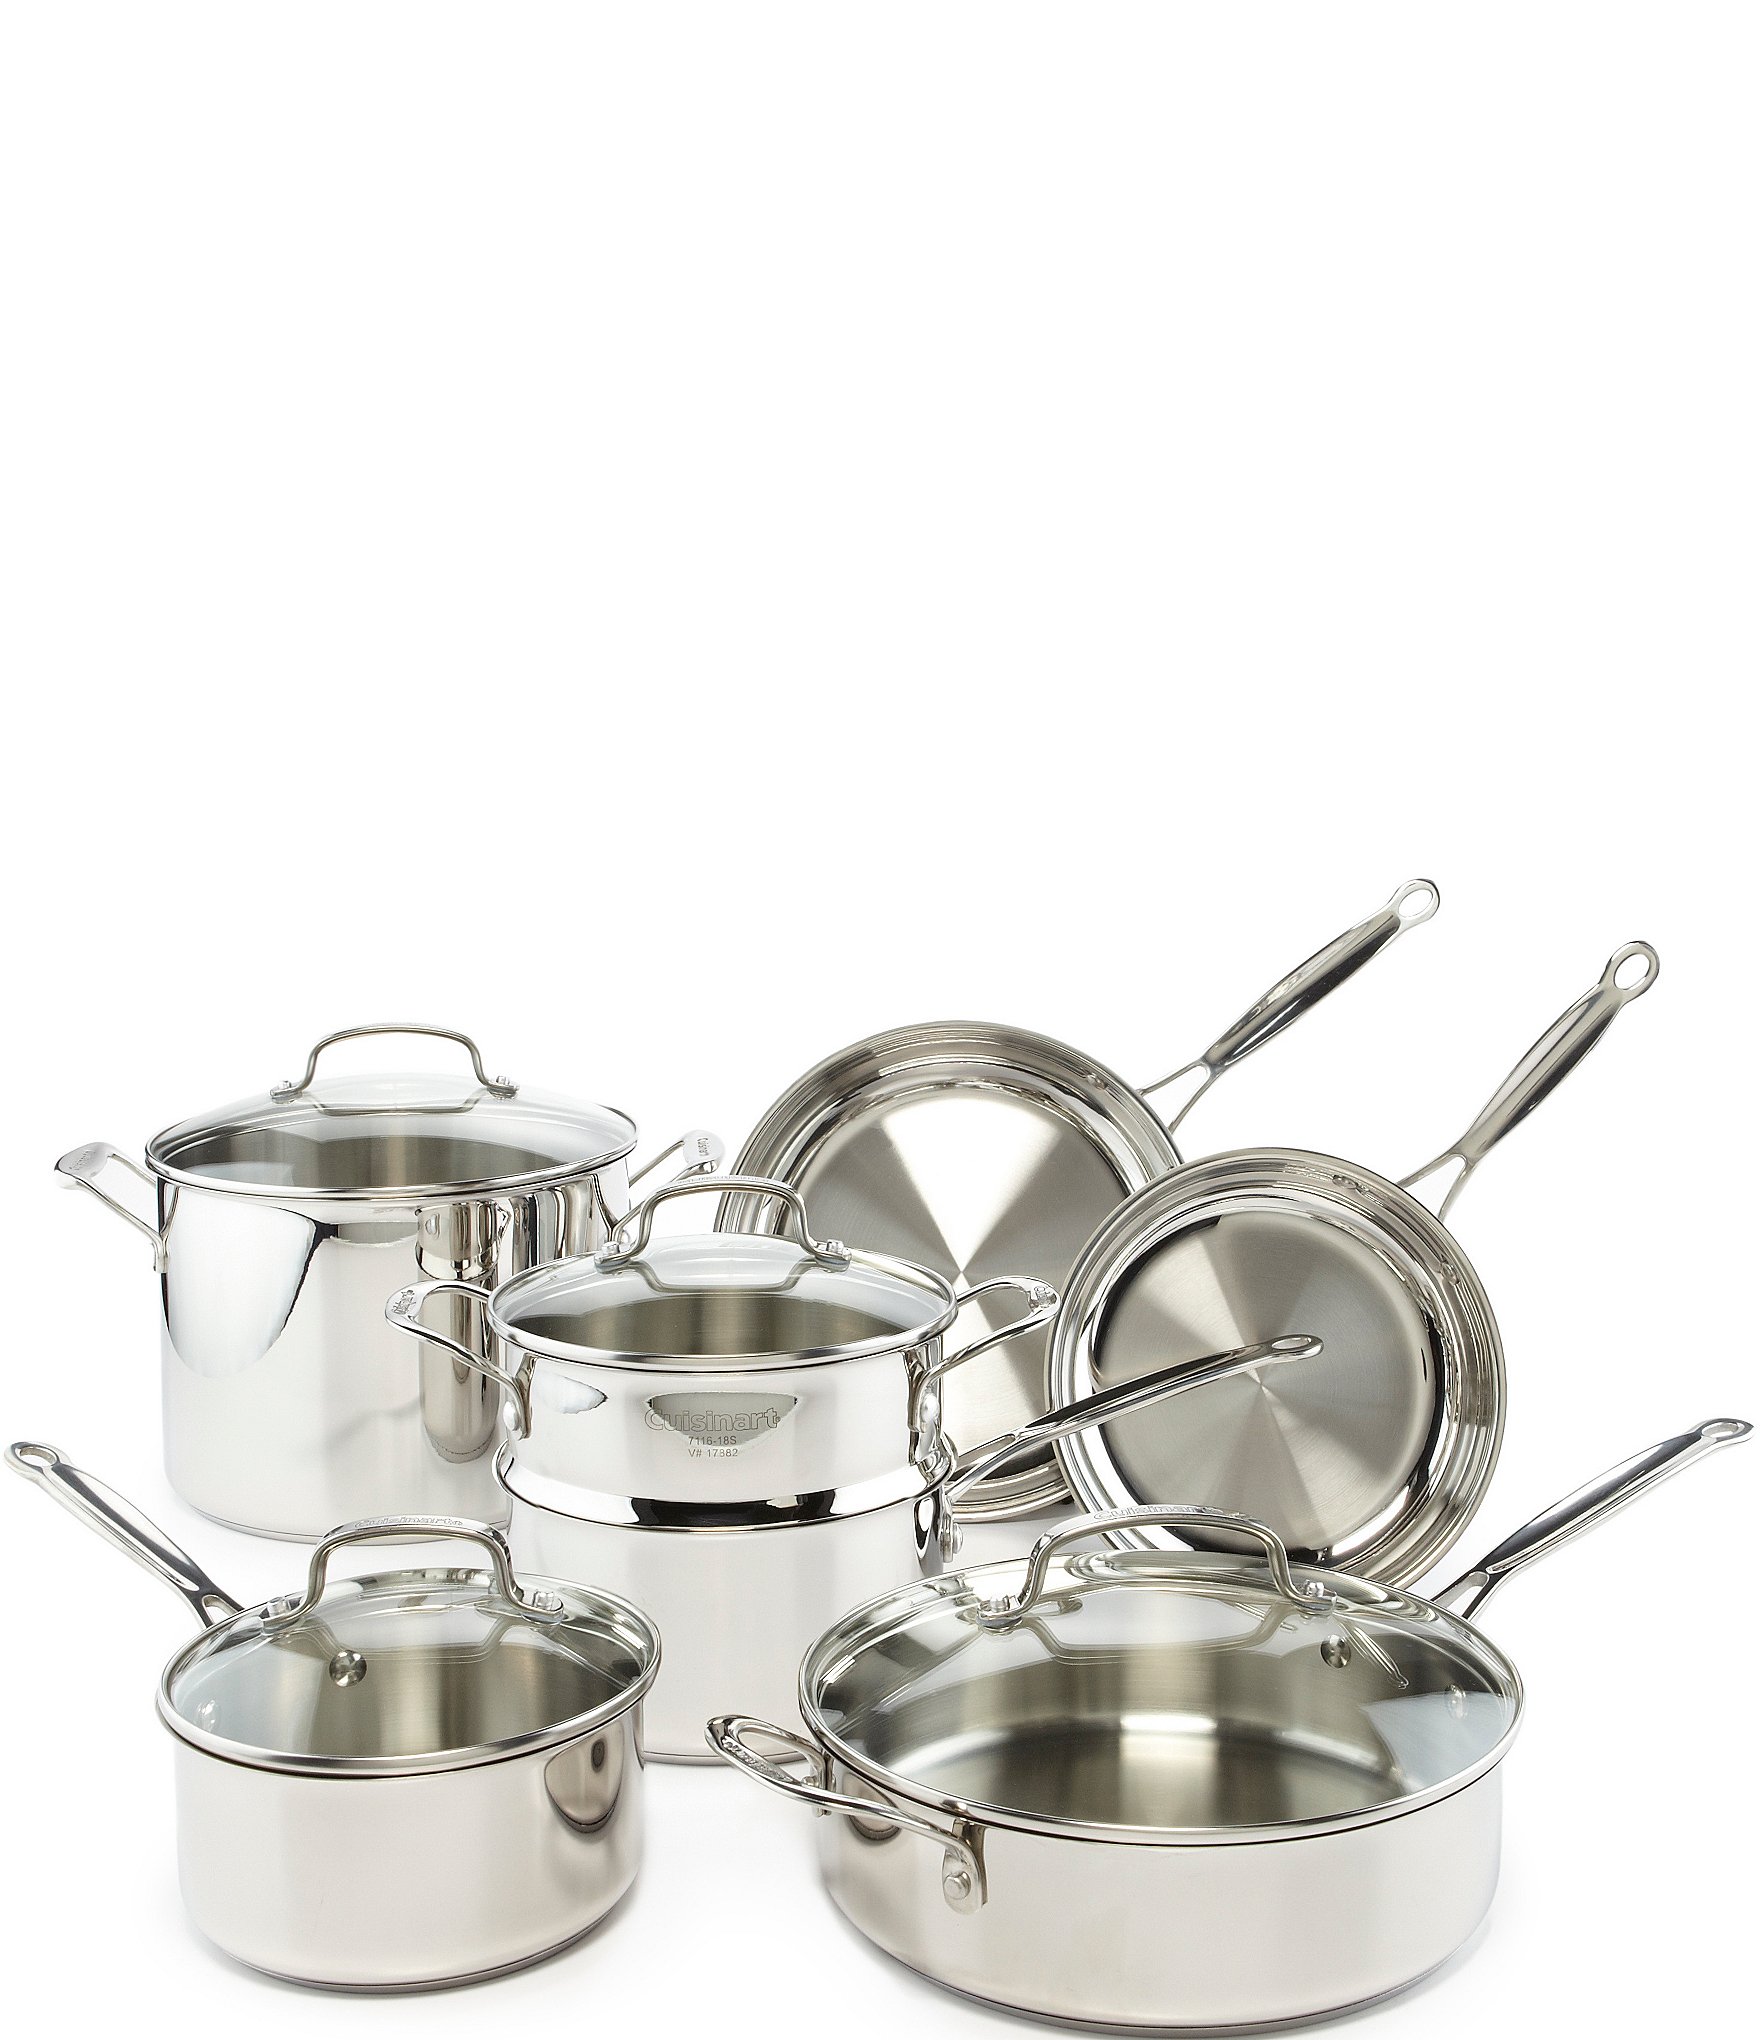 Cuisinart Chef's Classic Stainless Steel 11-Piece Cookware Set | Dillards Cuisinart Classic Stainless Steel Cookware